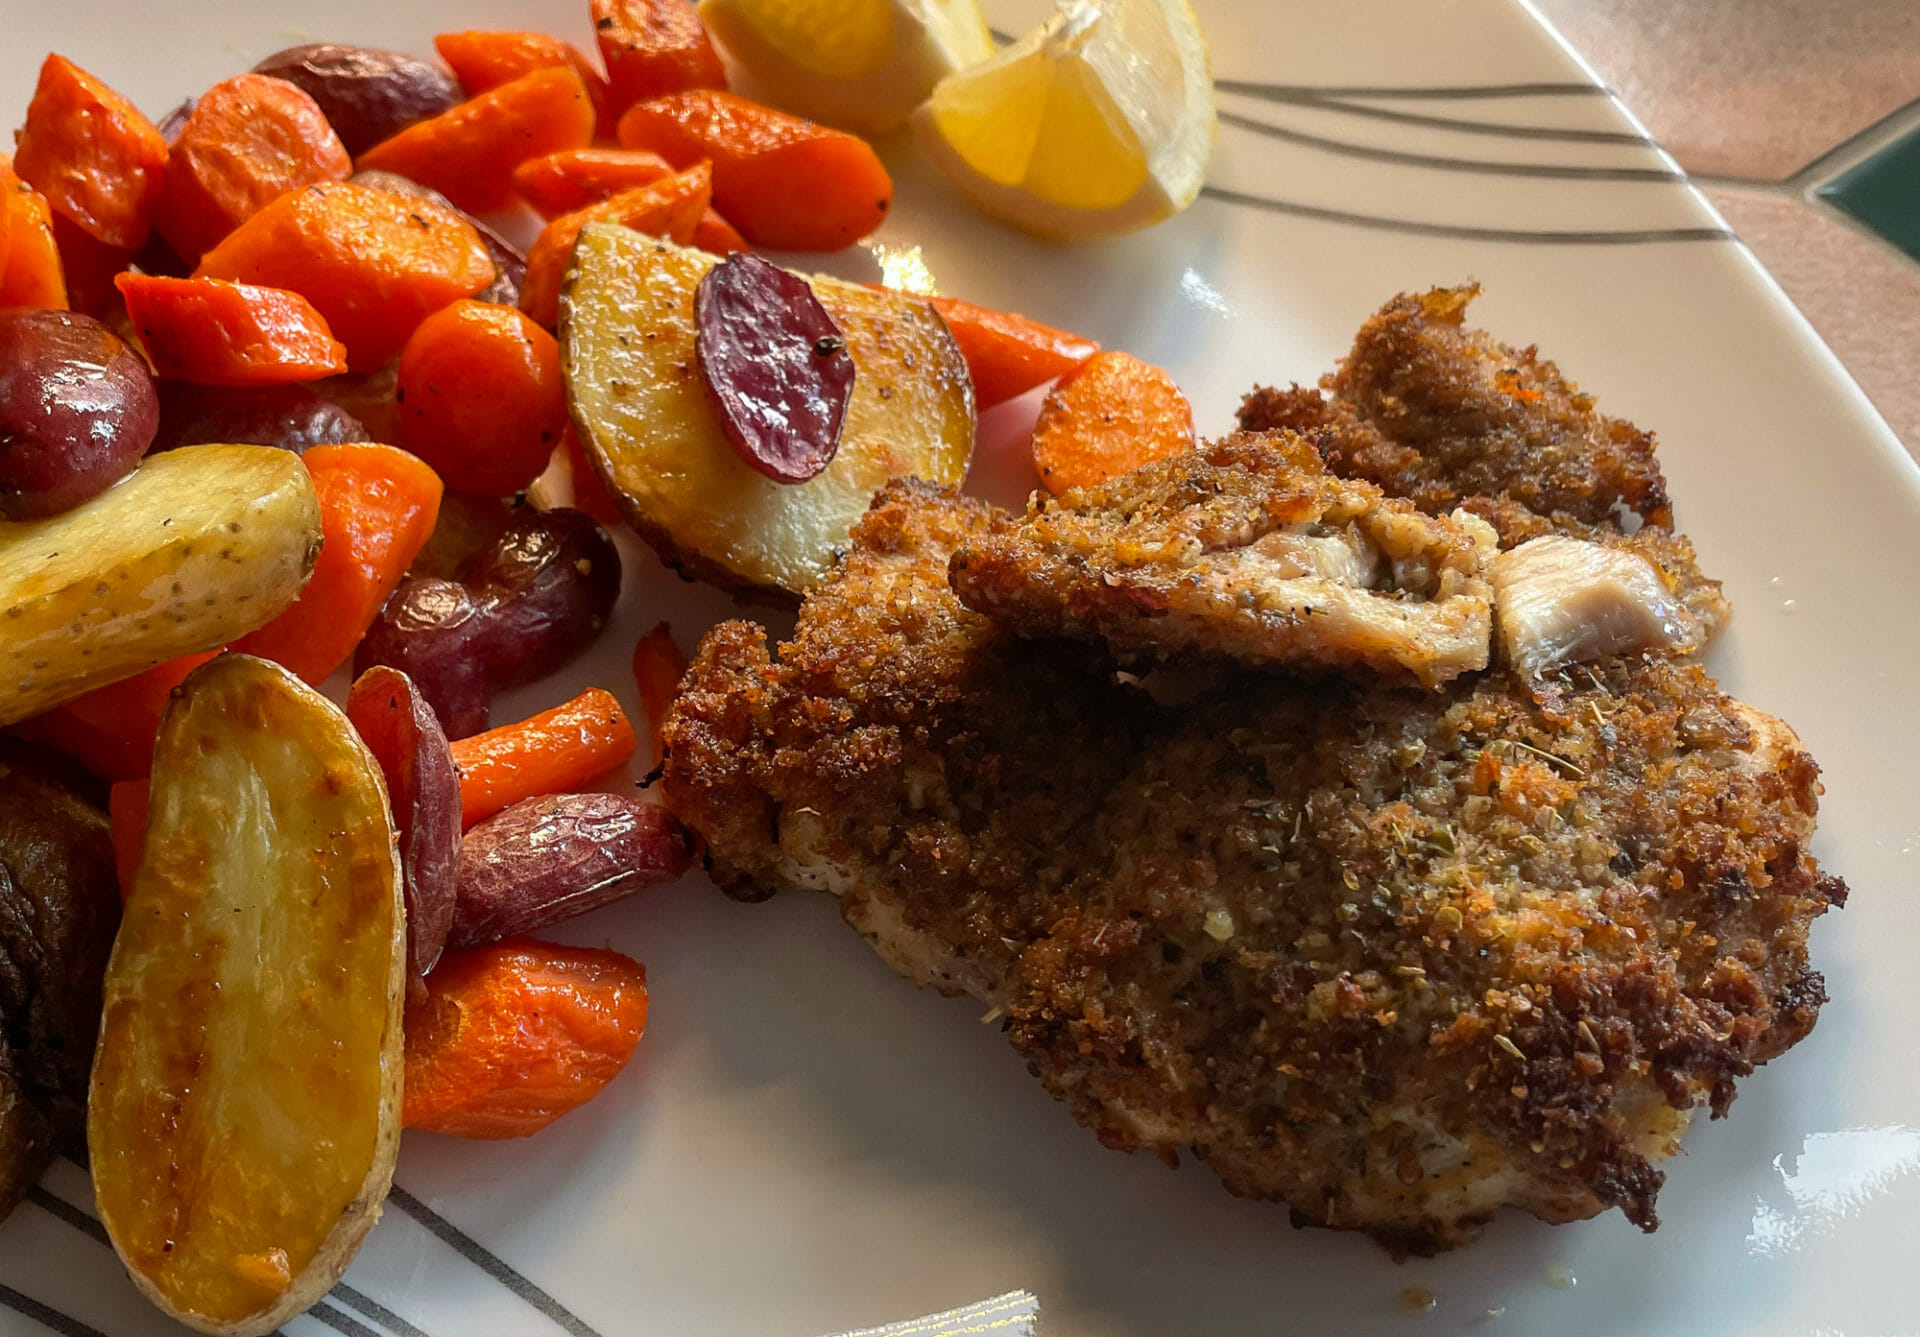 Chicken with roasted potatoes and carrots